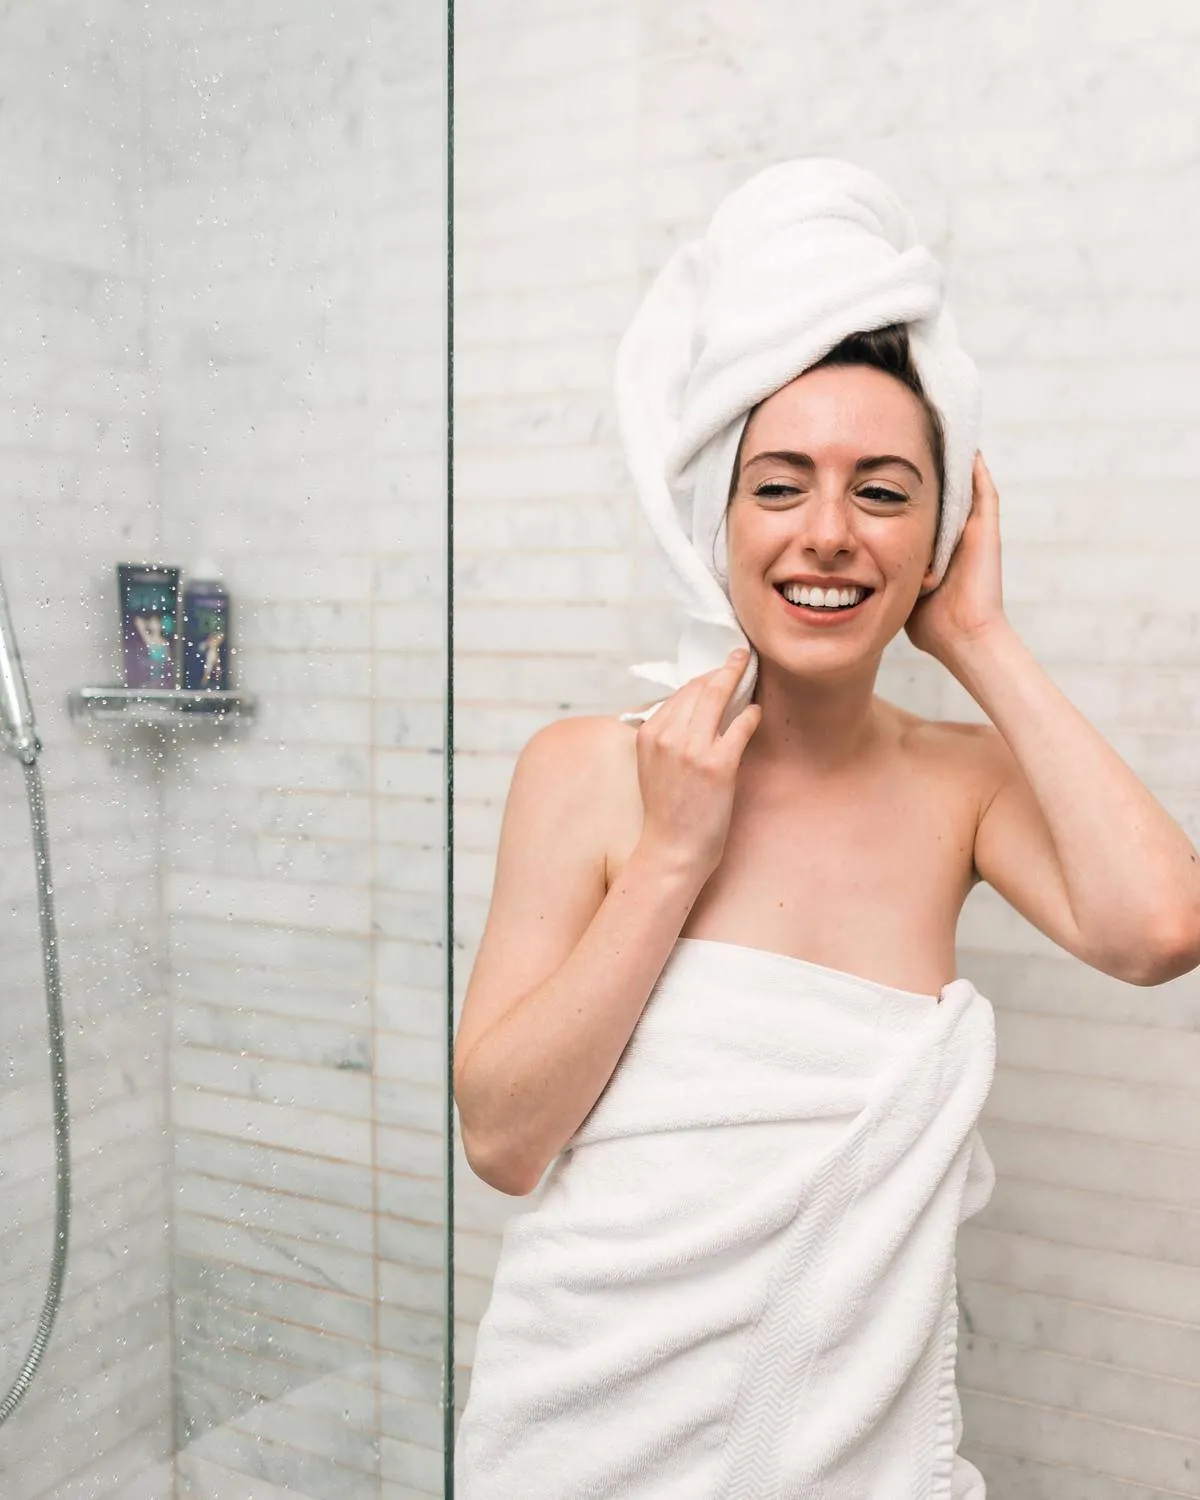 A woman with a towel wrapped around her hair exits the shower.